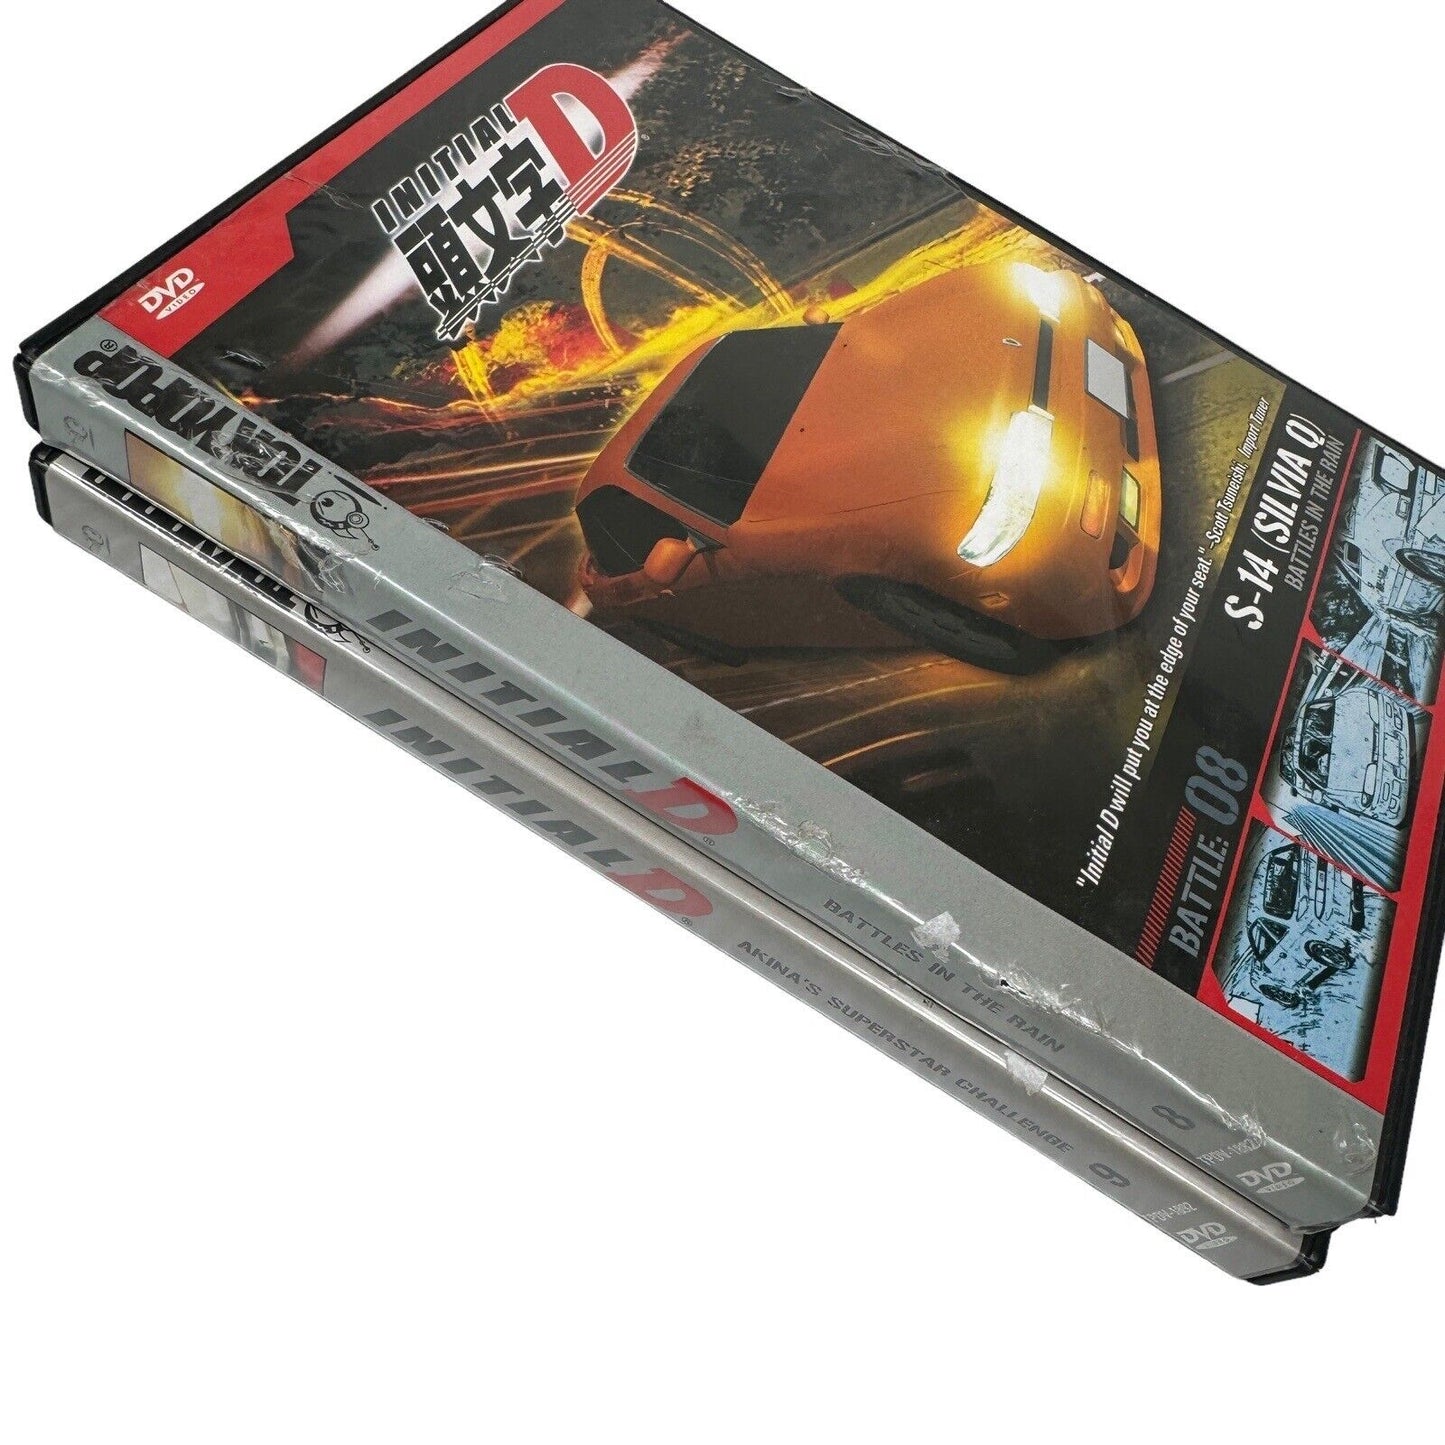 Initial D Racing Anime Volumes 8-14 (DVD) - Cards And Inserts Included